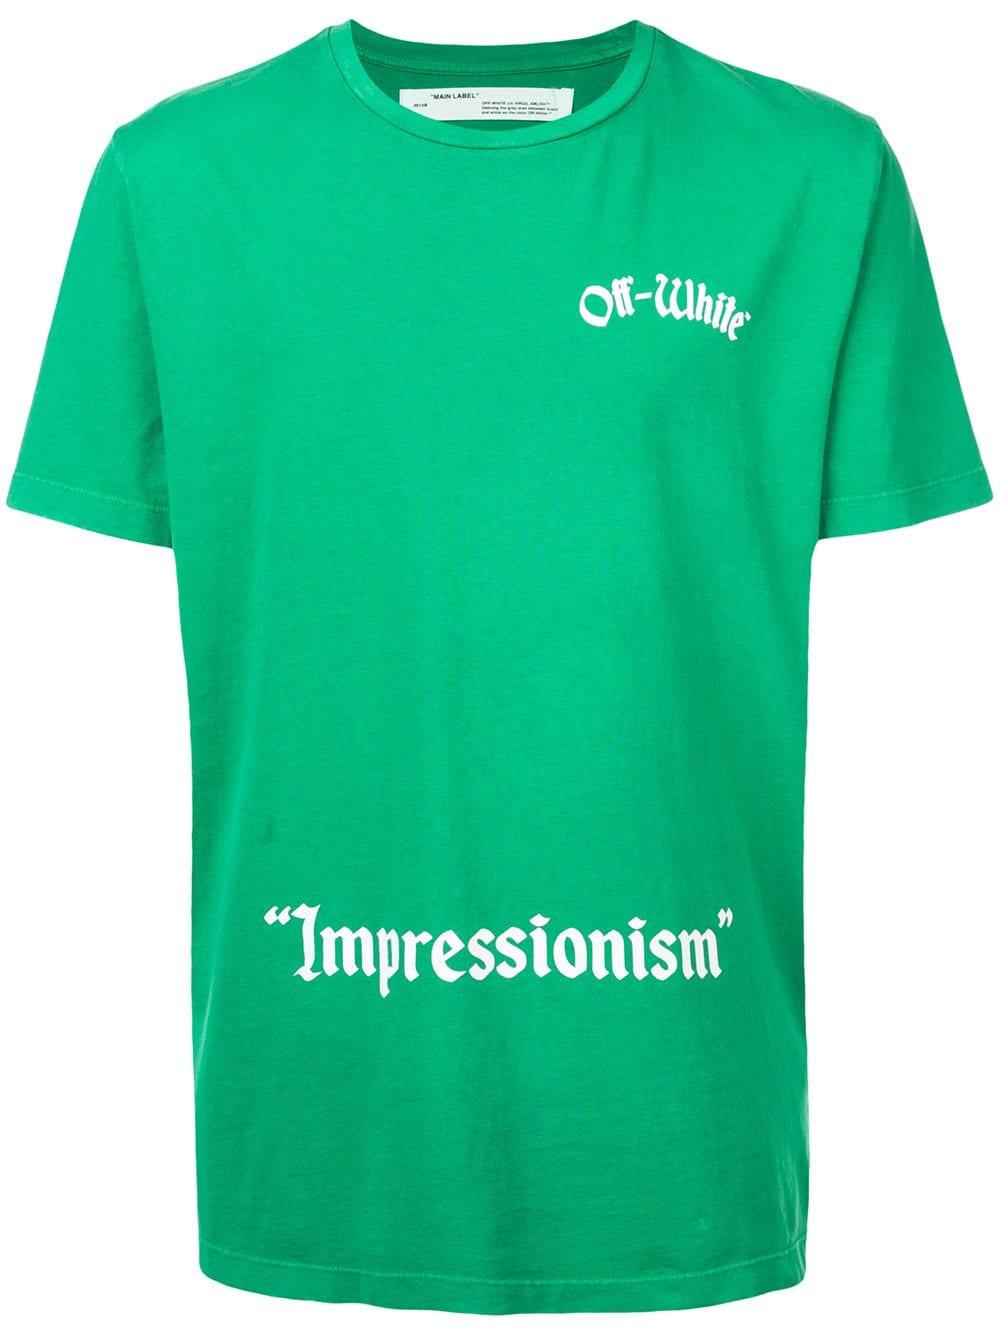 Off-White c/o Virgil Abloh Cotton Impressionism S/s T-shirt in Green ...